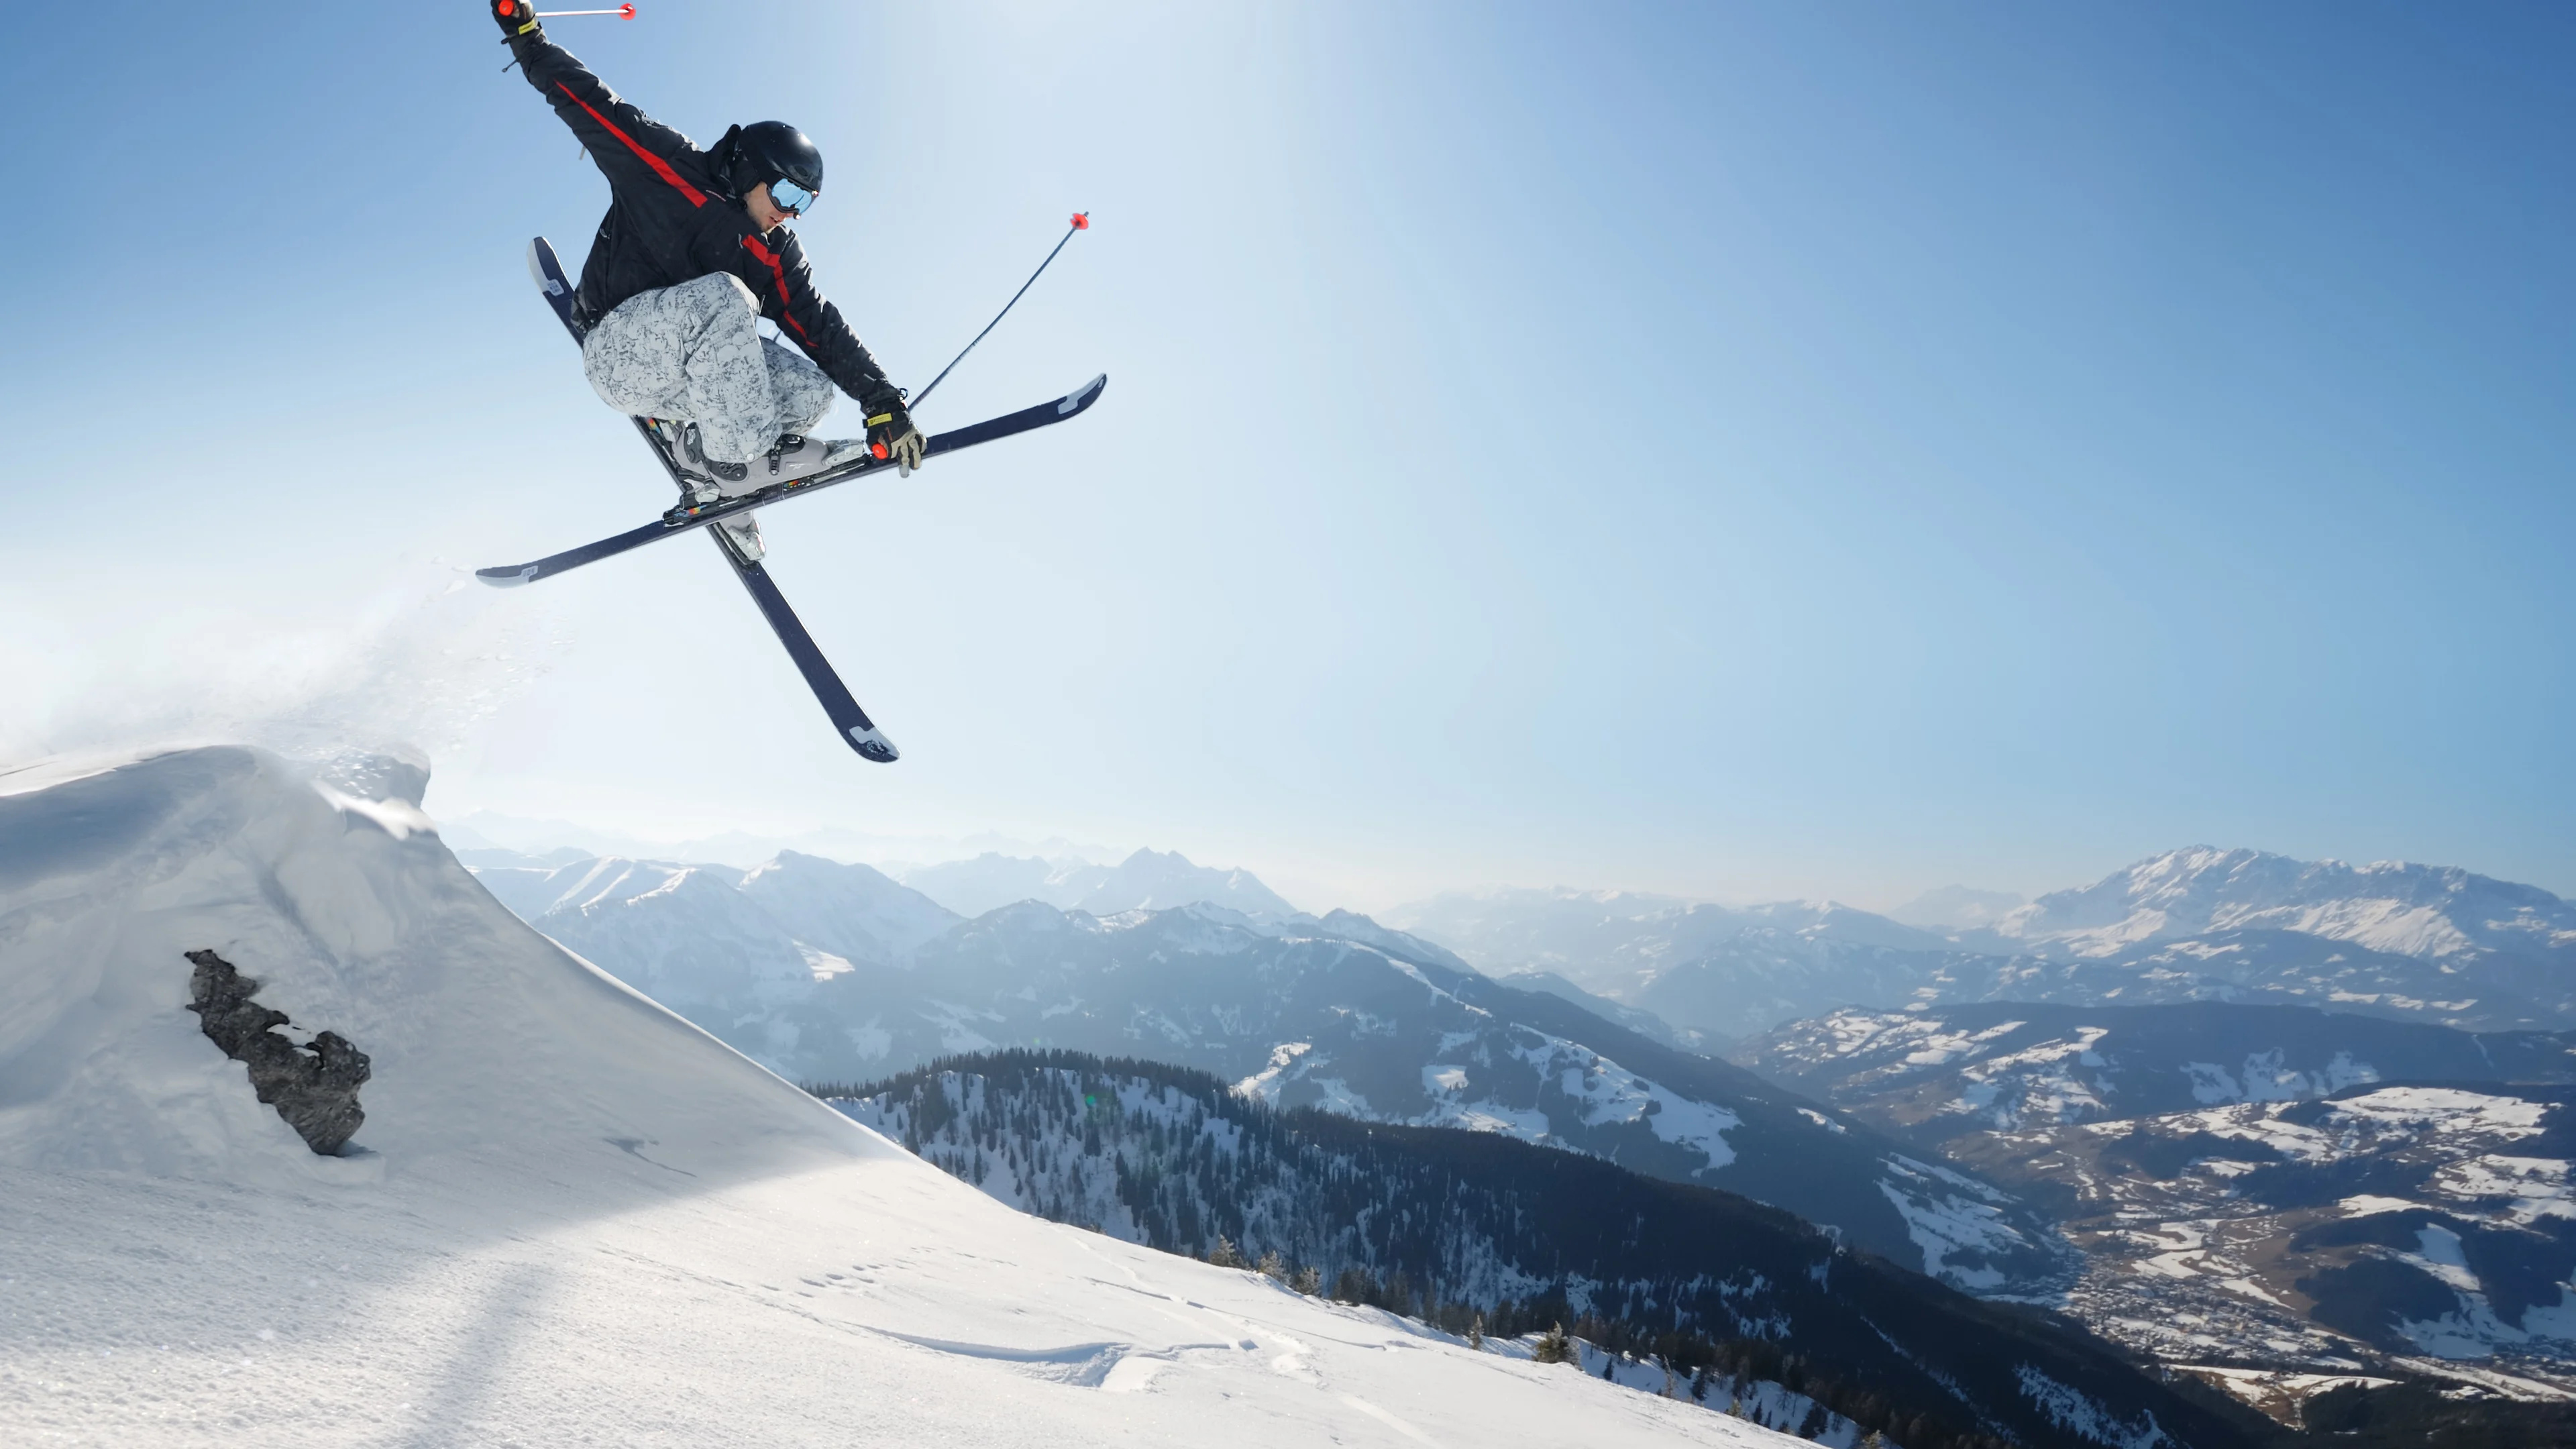 Alpine Skiing: Freestyle Skiing, A competitive winter sport, Extreme sports. 3840x2160 4K Background.